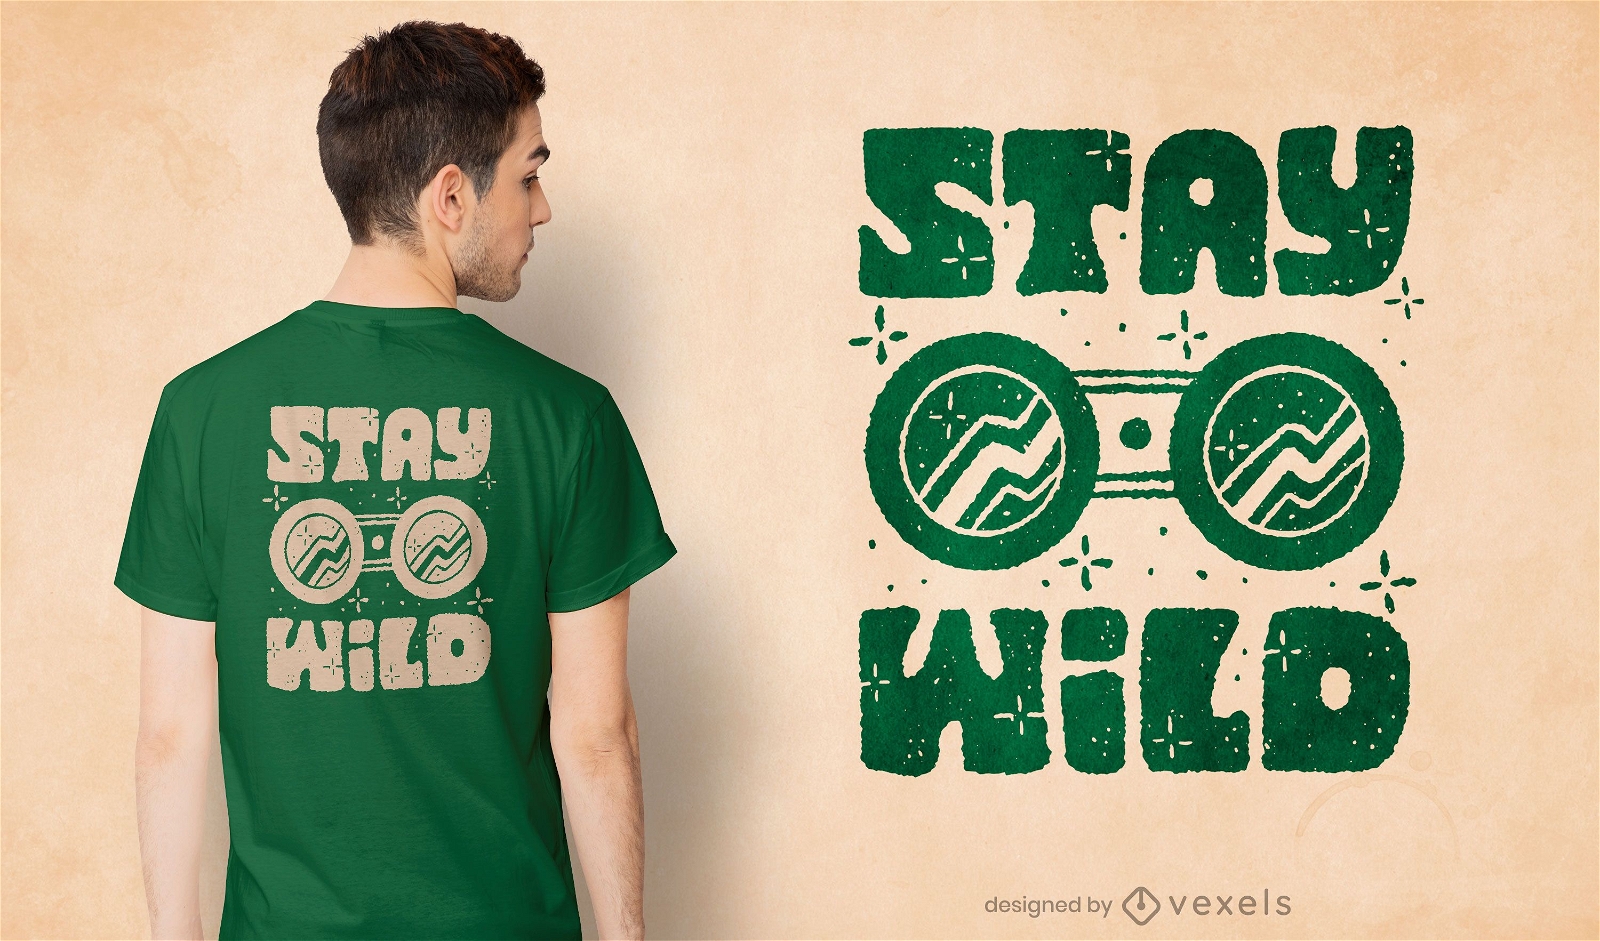 Stay wild quote t-shirt design